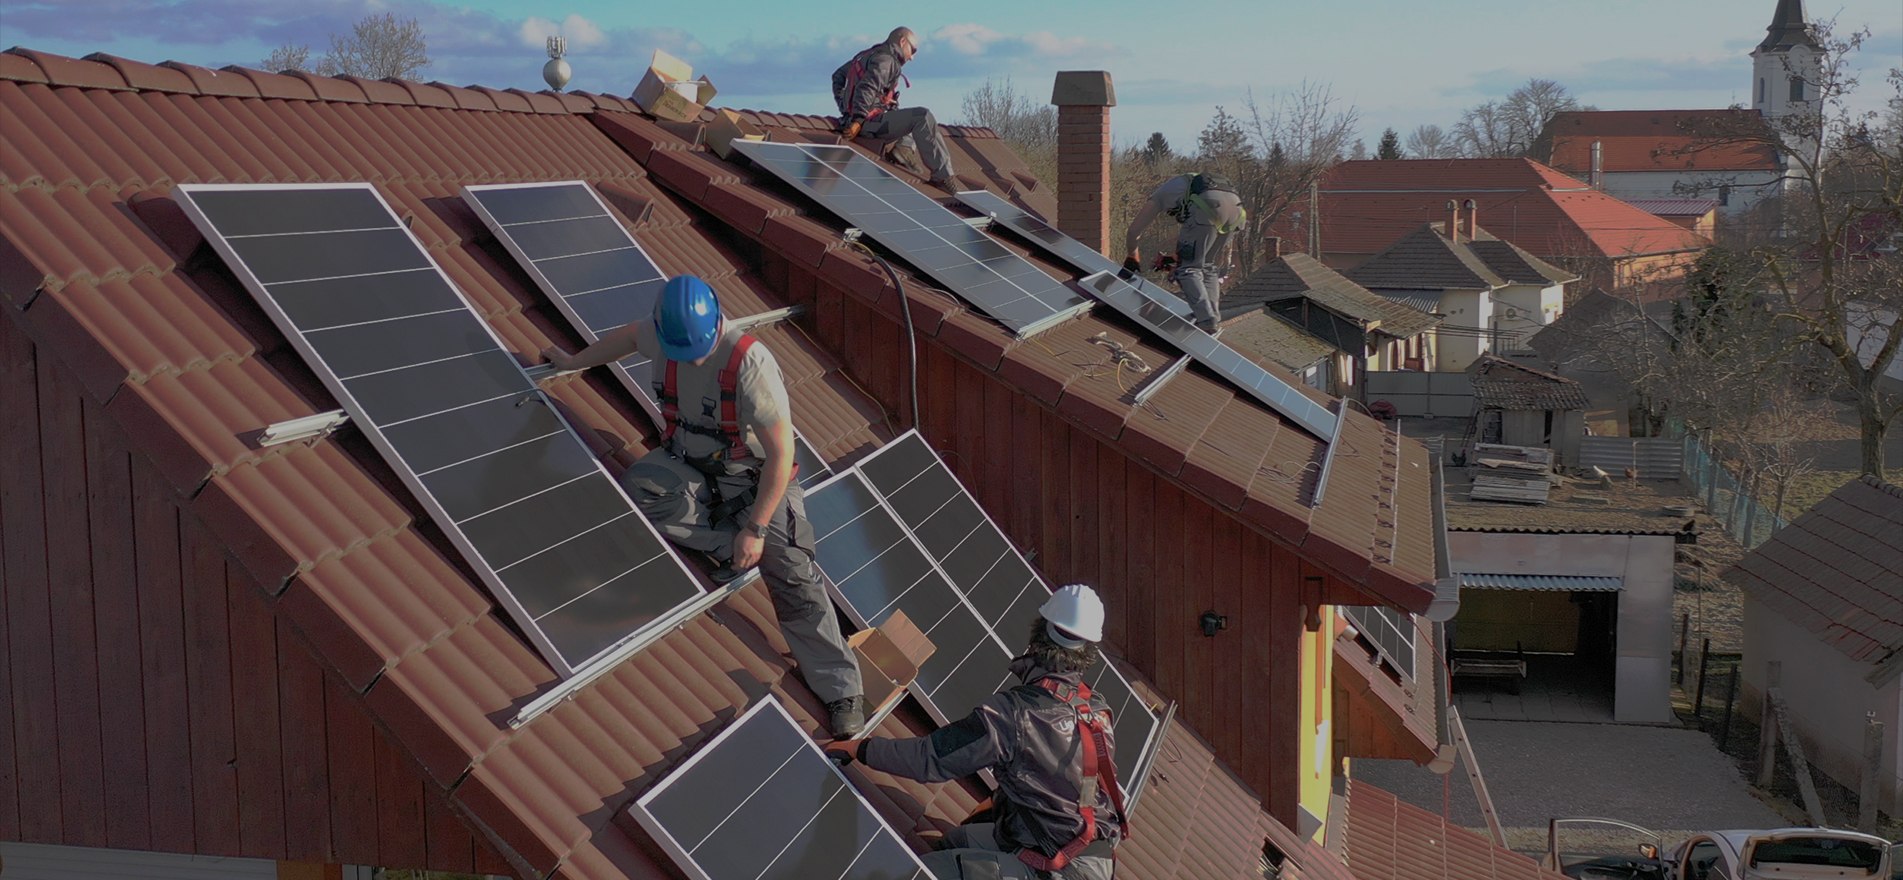 Tile roof solar mounting system